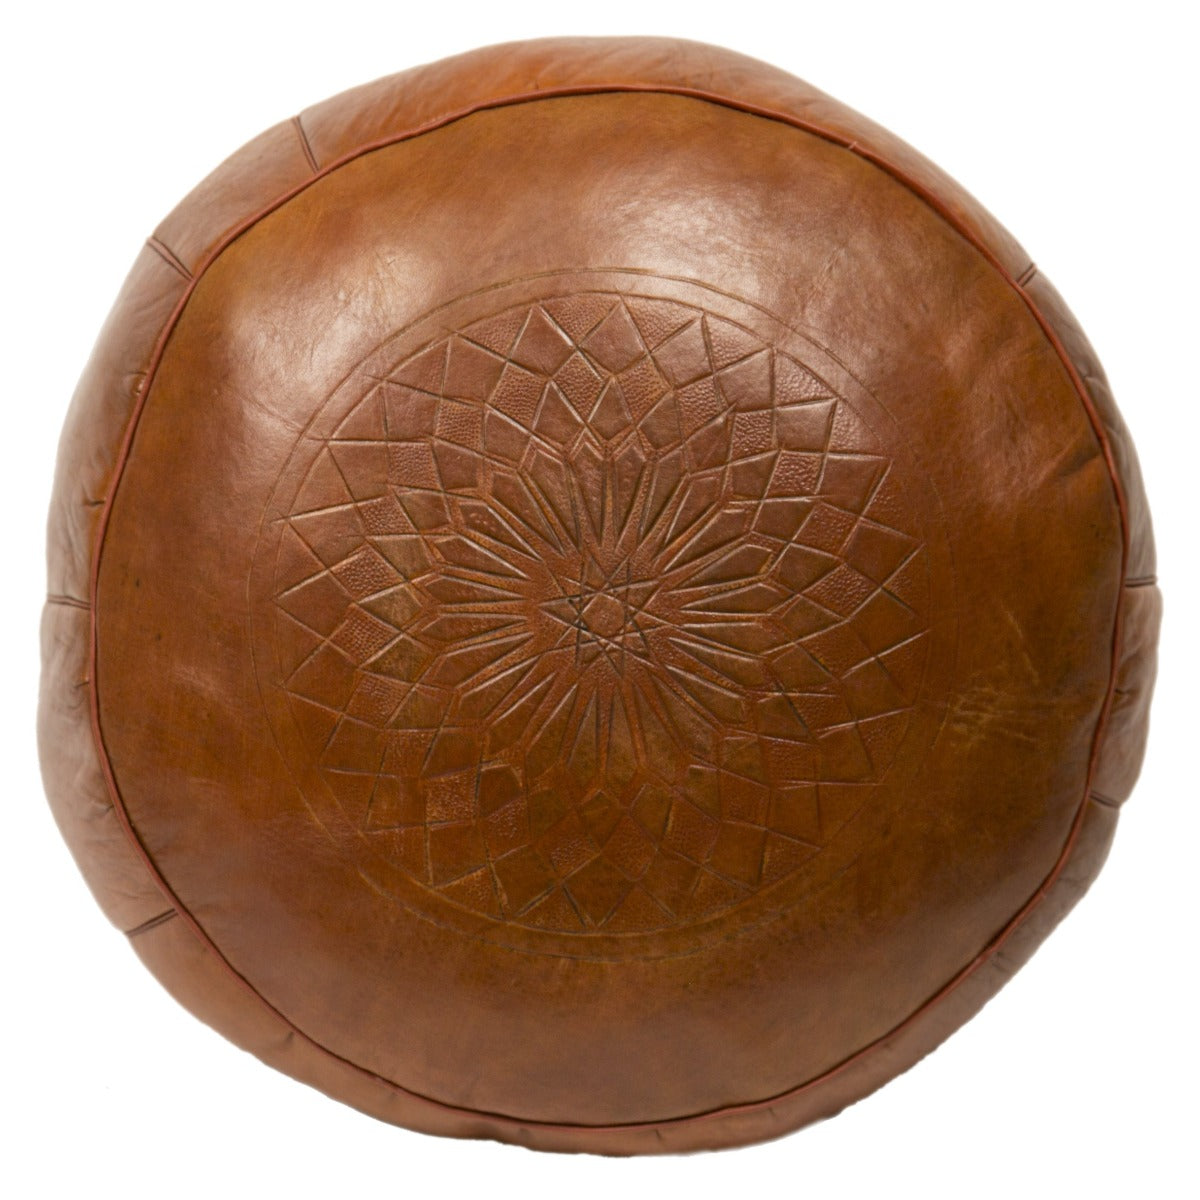 Solid Color Leather Pouf, Tobacco